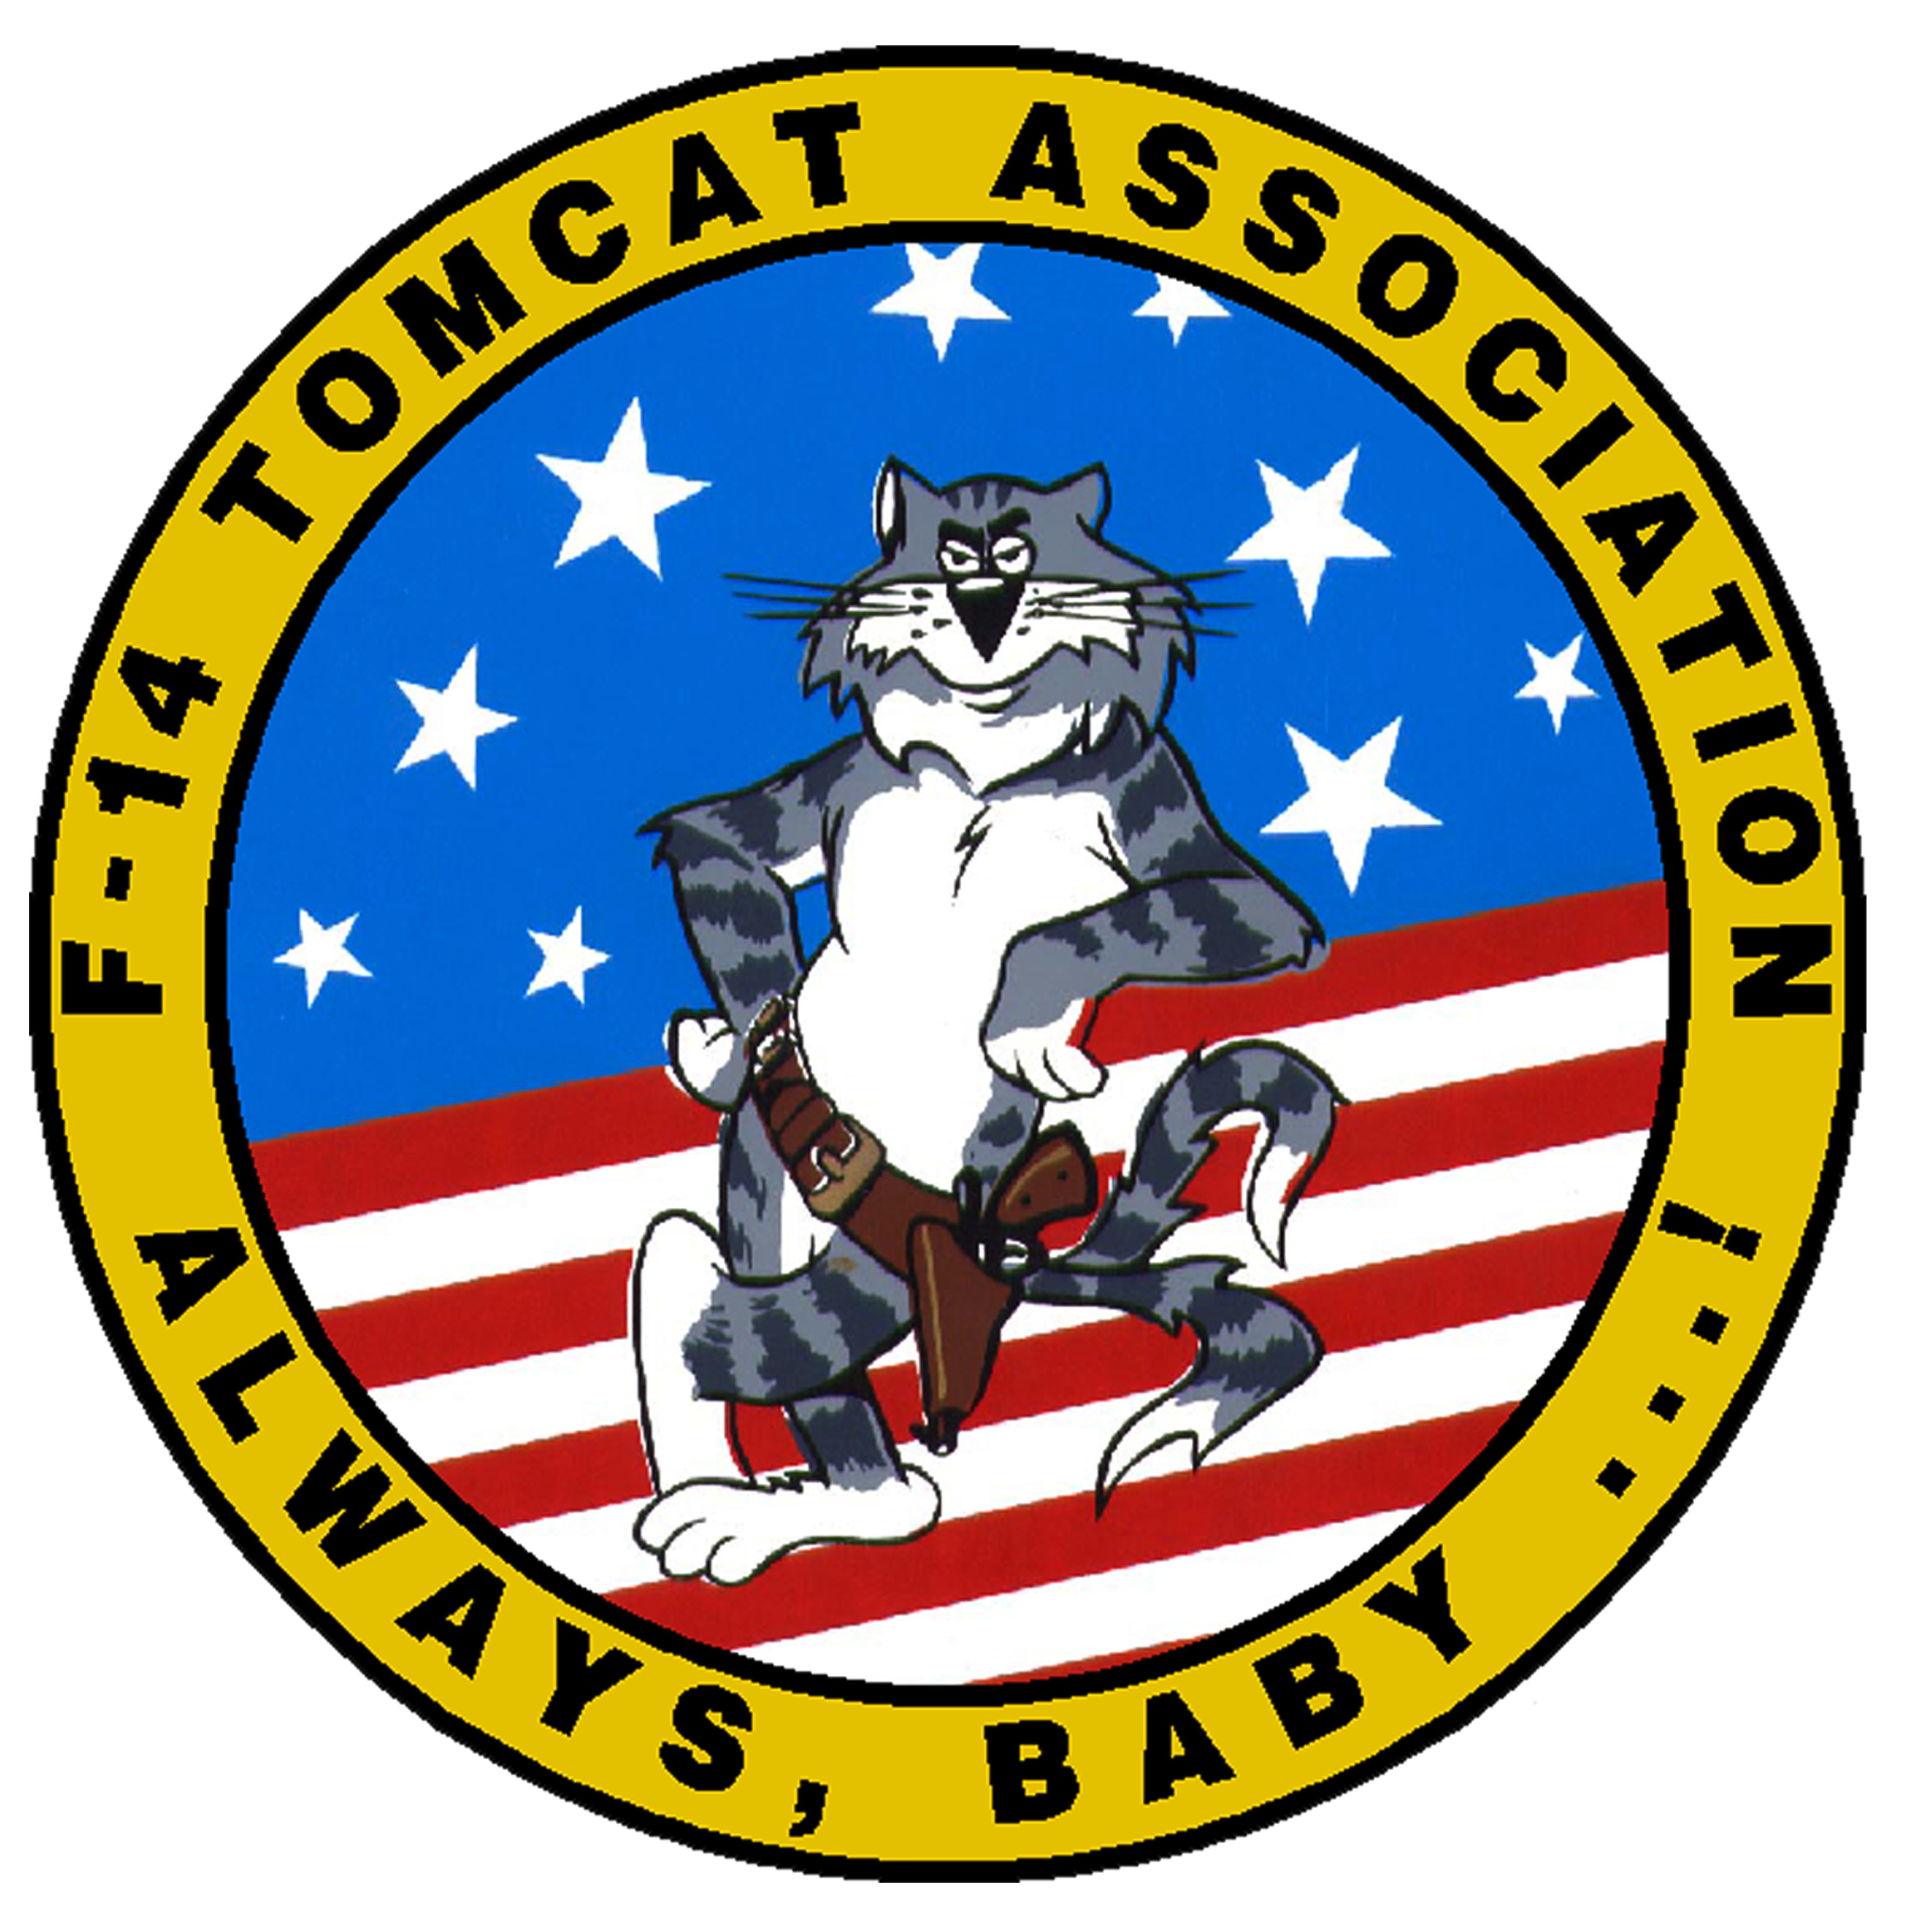 Click to View TOMCAT ASSOCIATION Country Store!